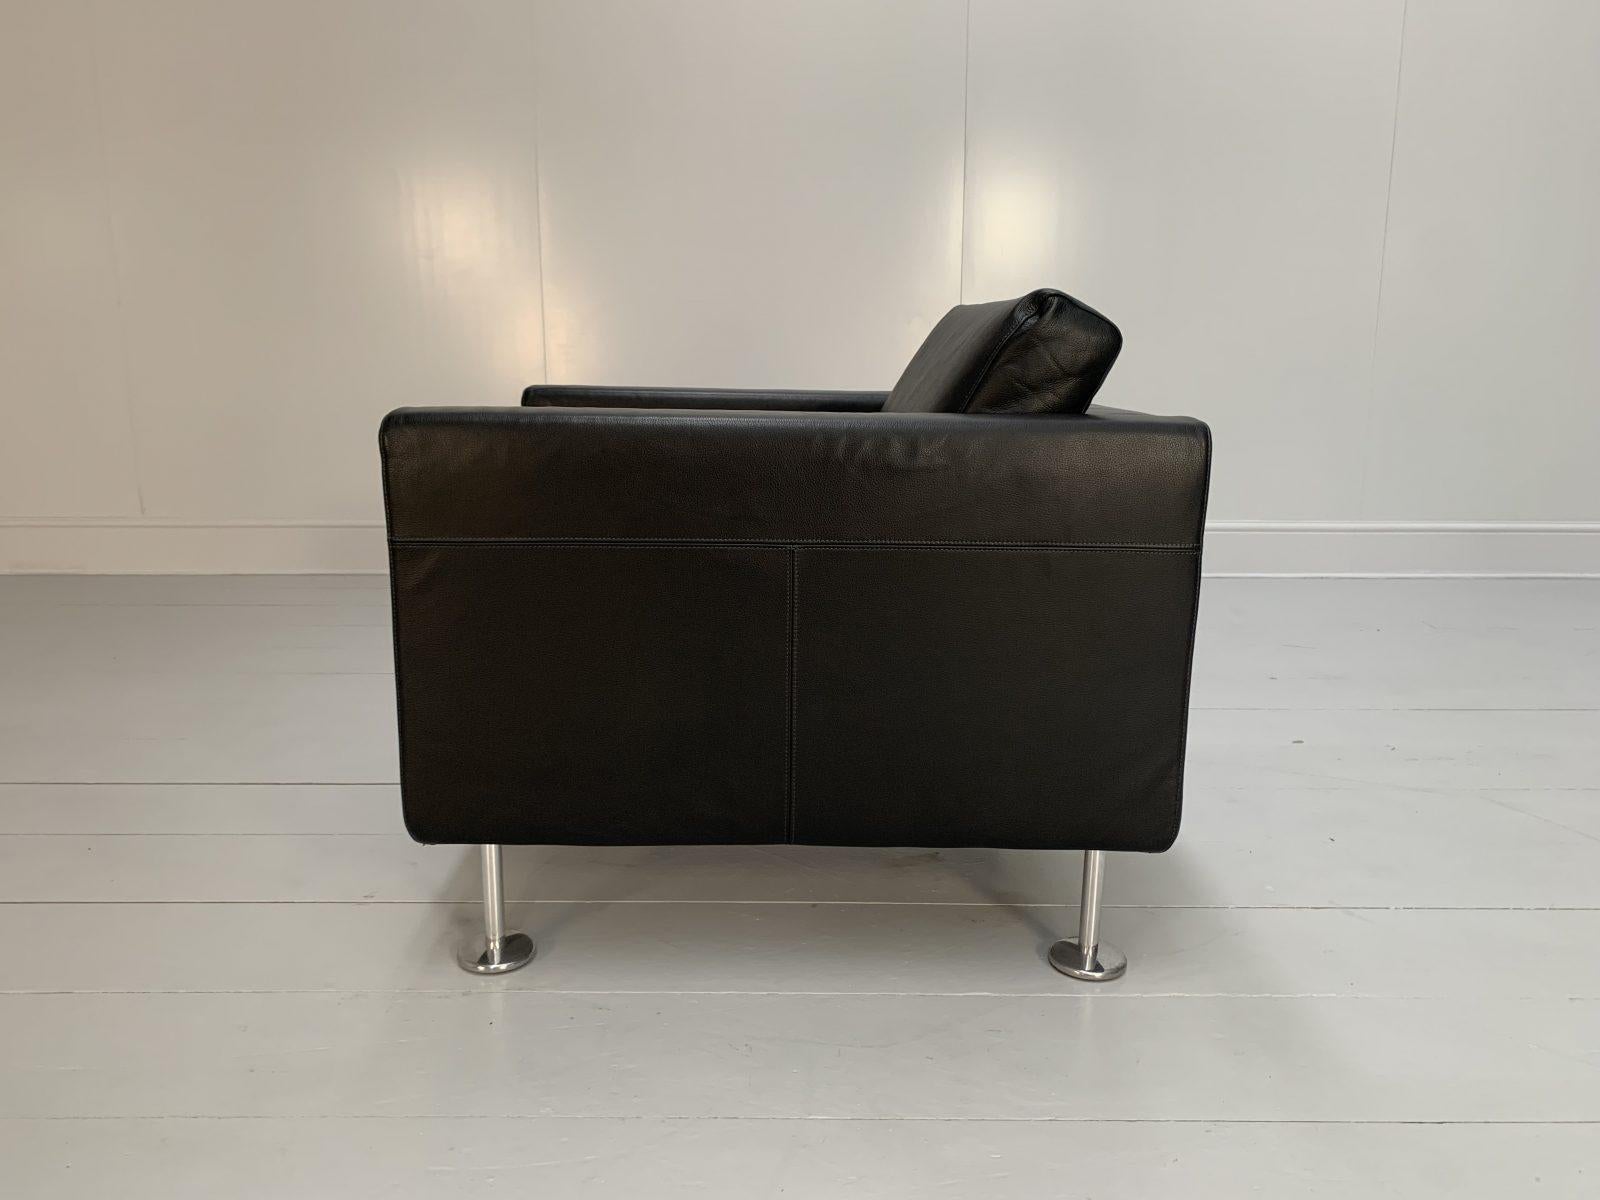 Vitra “Park” Armchair – In Jet Black Leather For Sale 2